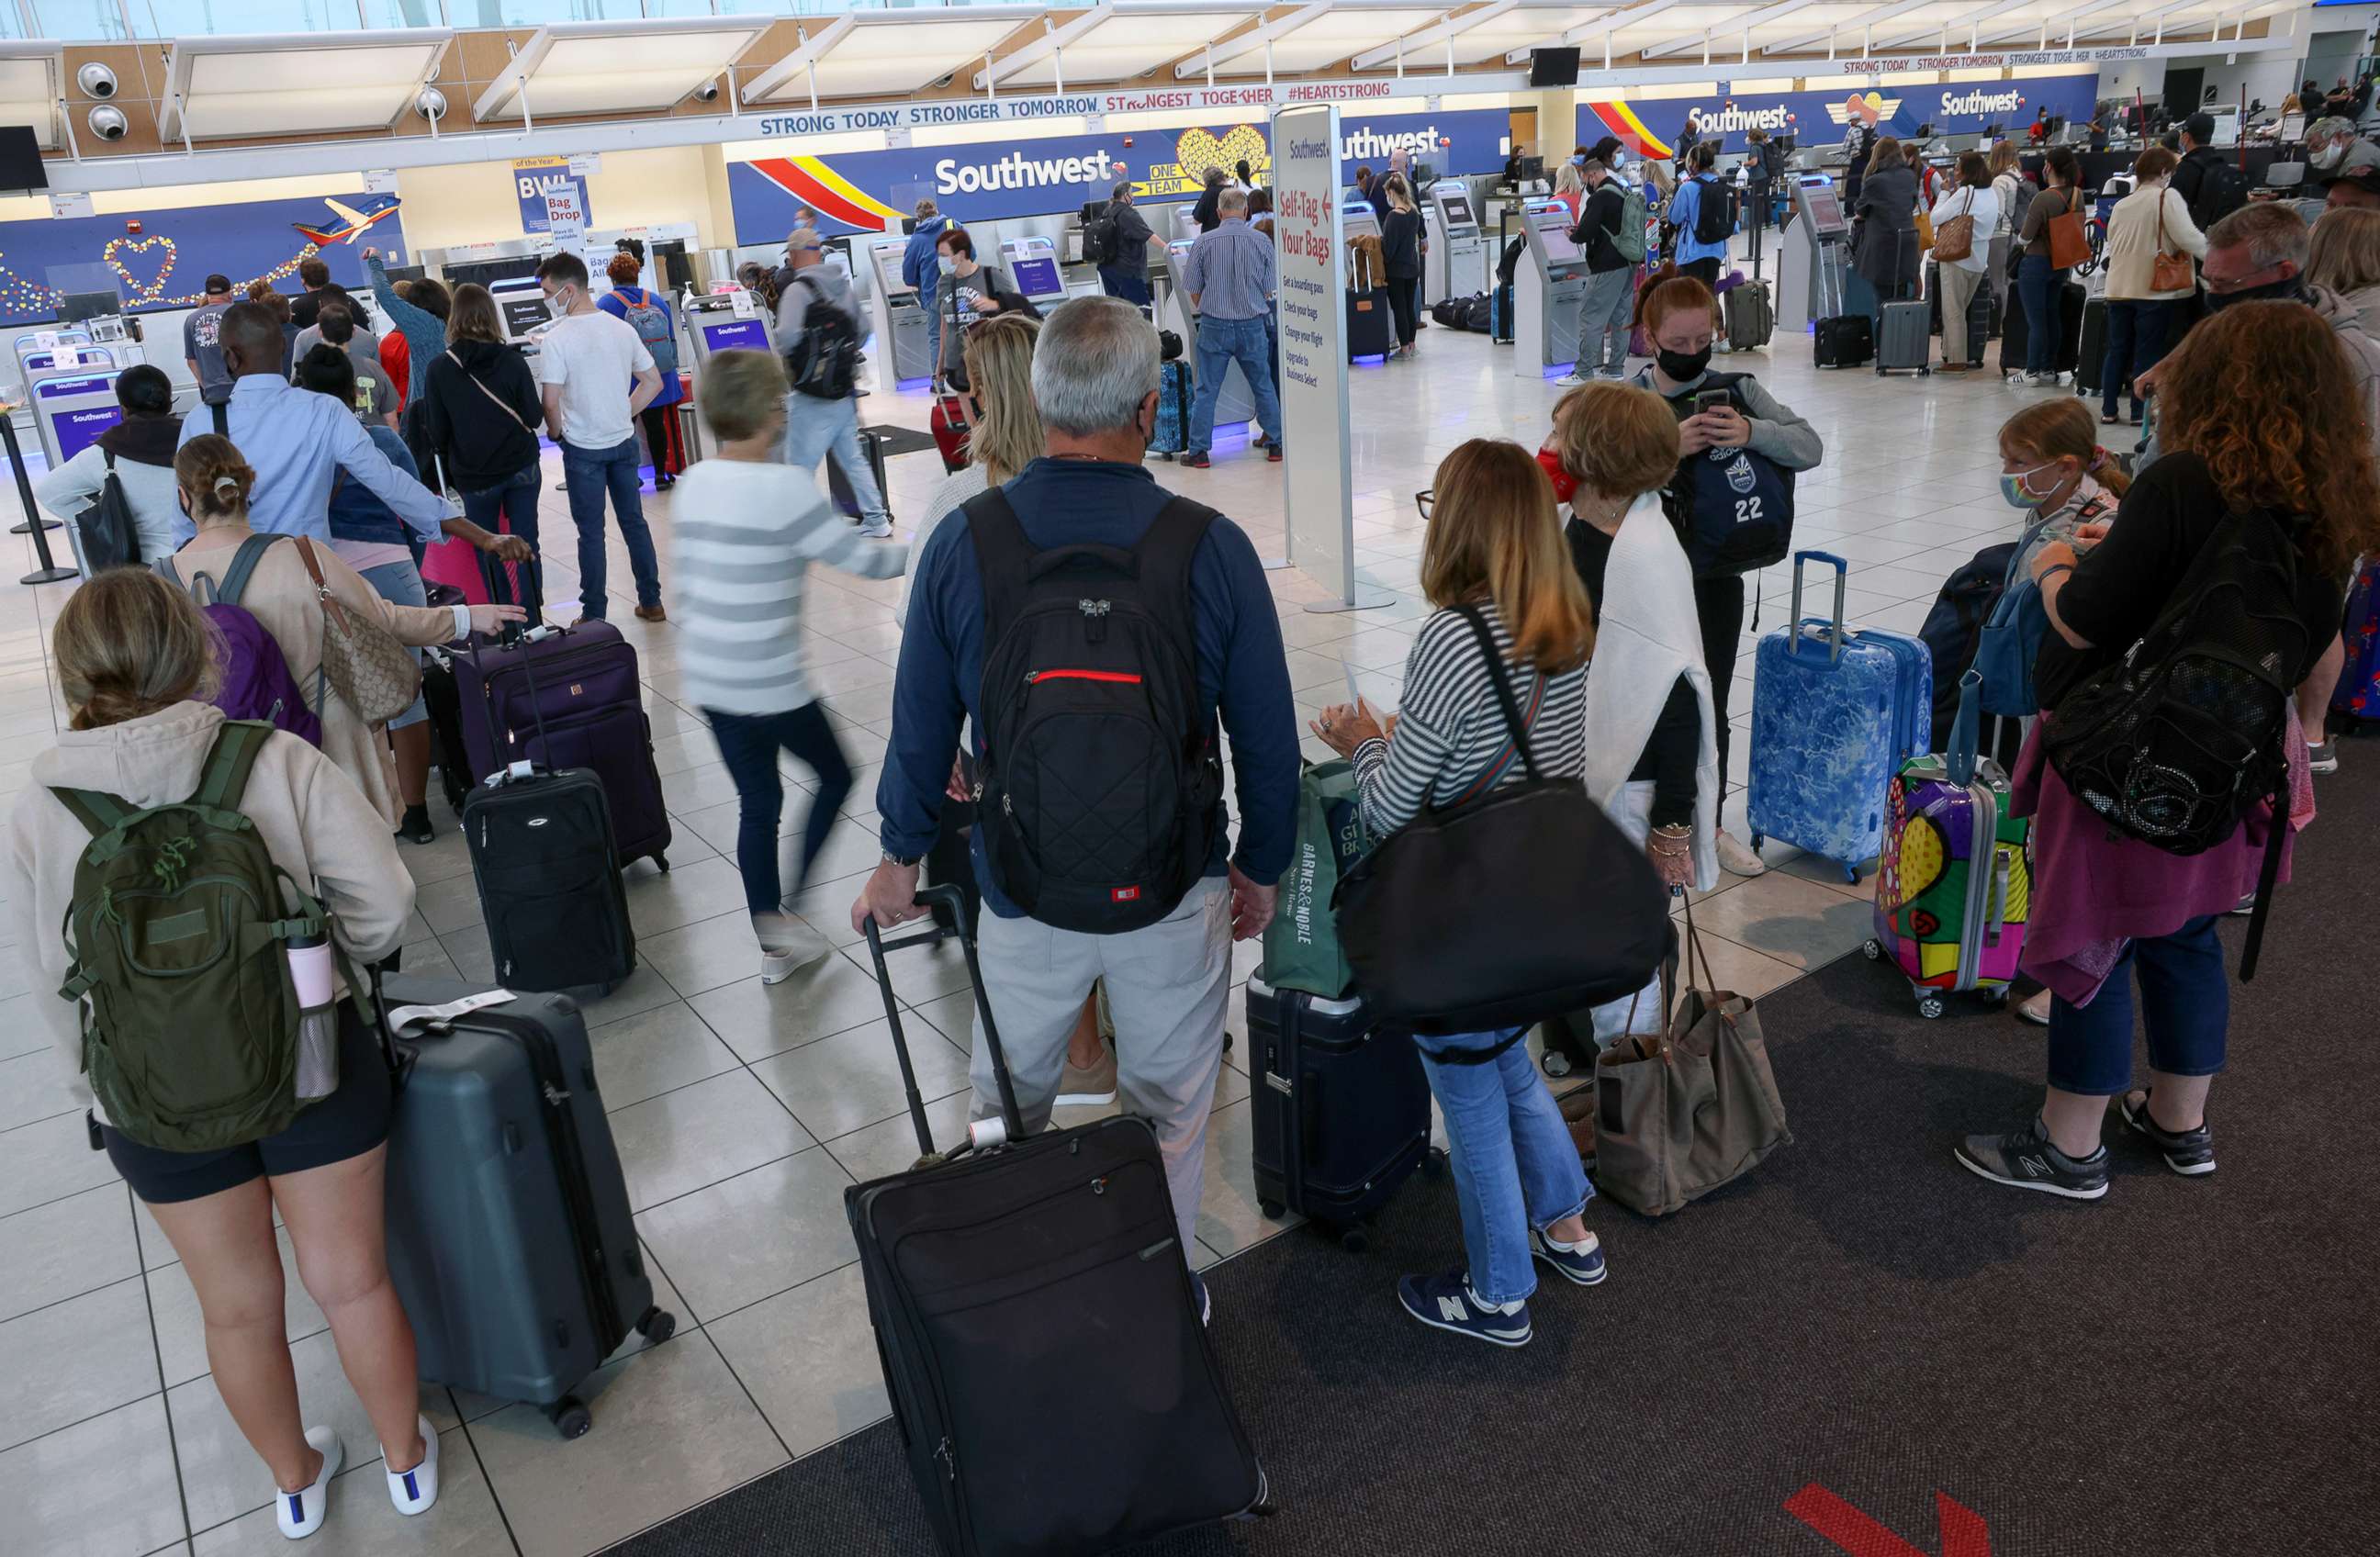 PHOTO: Travelers wait to check in at the Southwest Airlines ticketing counter at Baltimore Washington International Thurgood Marshall Airport, Oct. 11, 2021, in Baltimore.